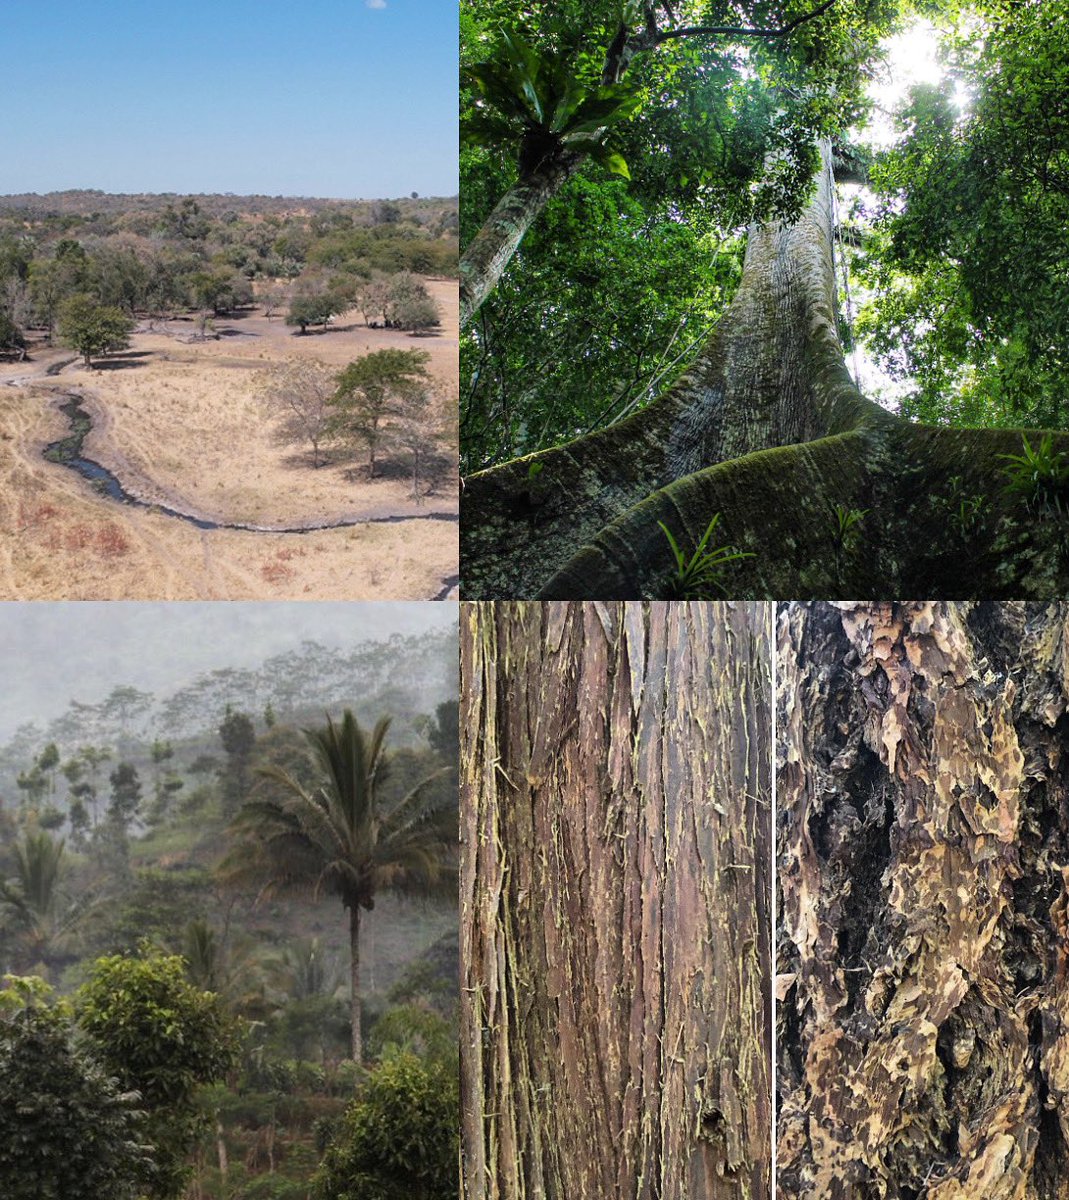 Celebrating the International Day of Forests with a few photos of the forests we’ve been fortunate to work in 🌲🌴🌳@ubcforestry #ForestDay #IntlForestDay